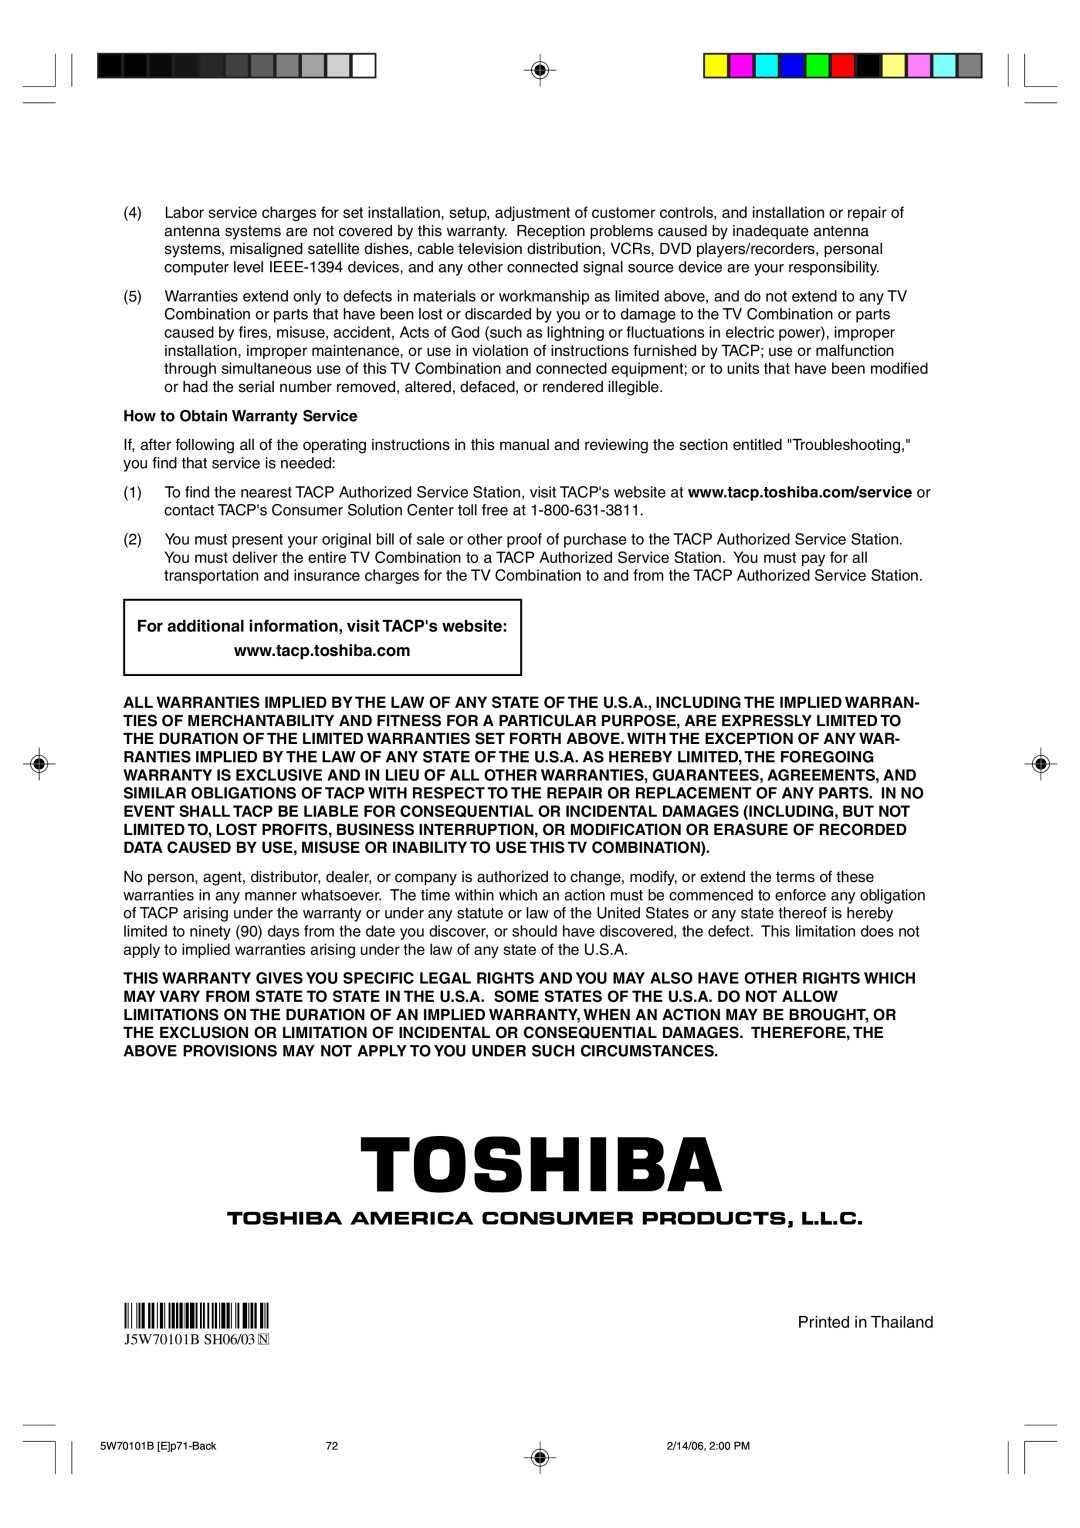 Toshiba MW24F52, MW20F52 owner manual For additional information, visit TACPs website, Printed in Thailand 